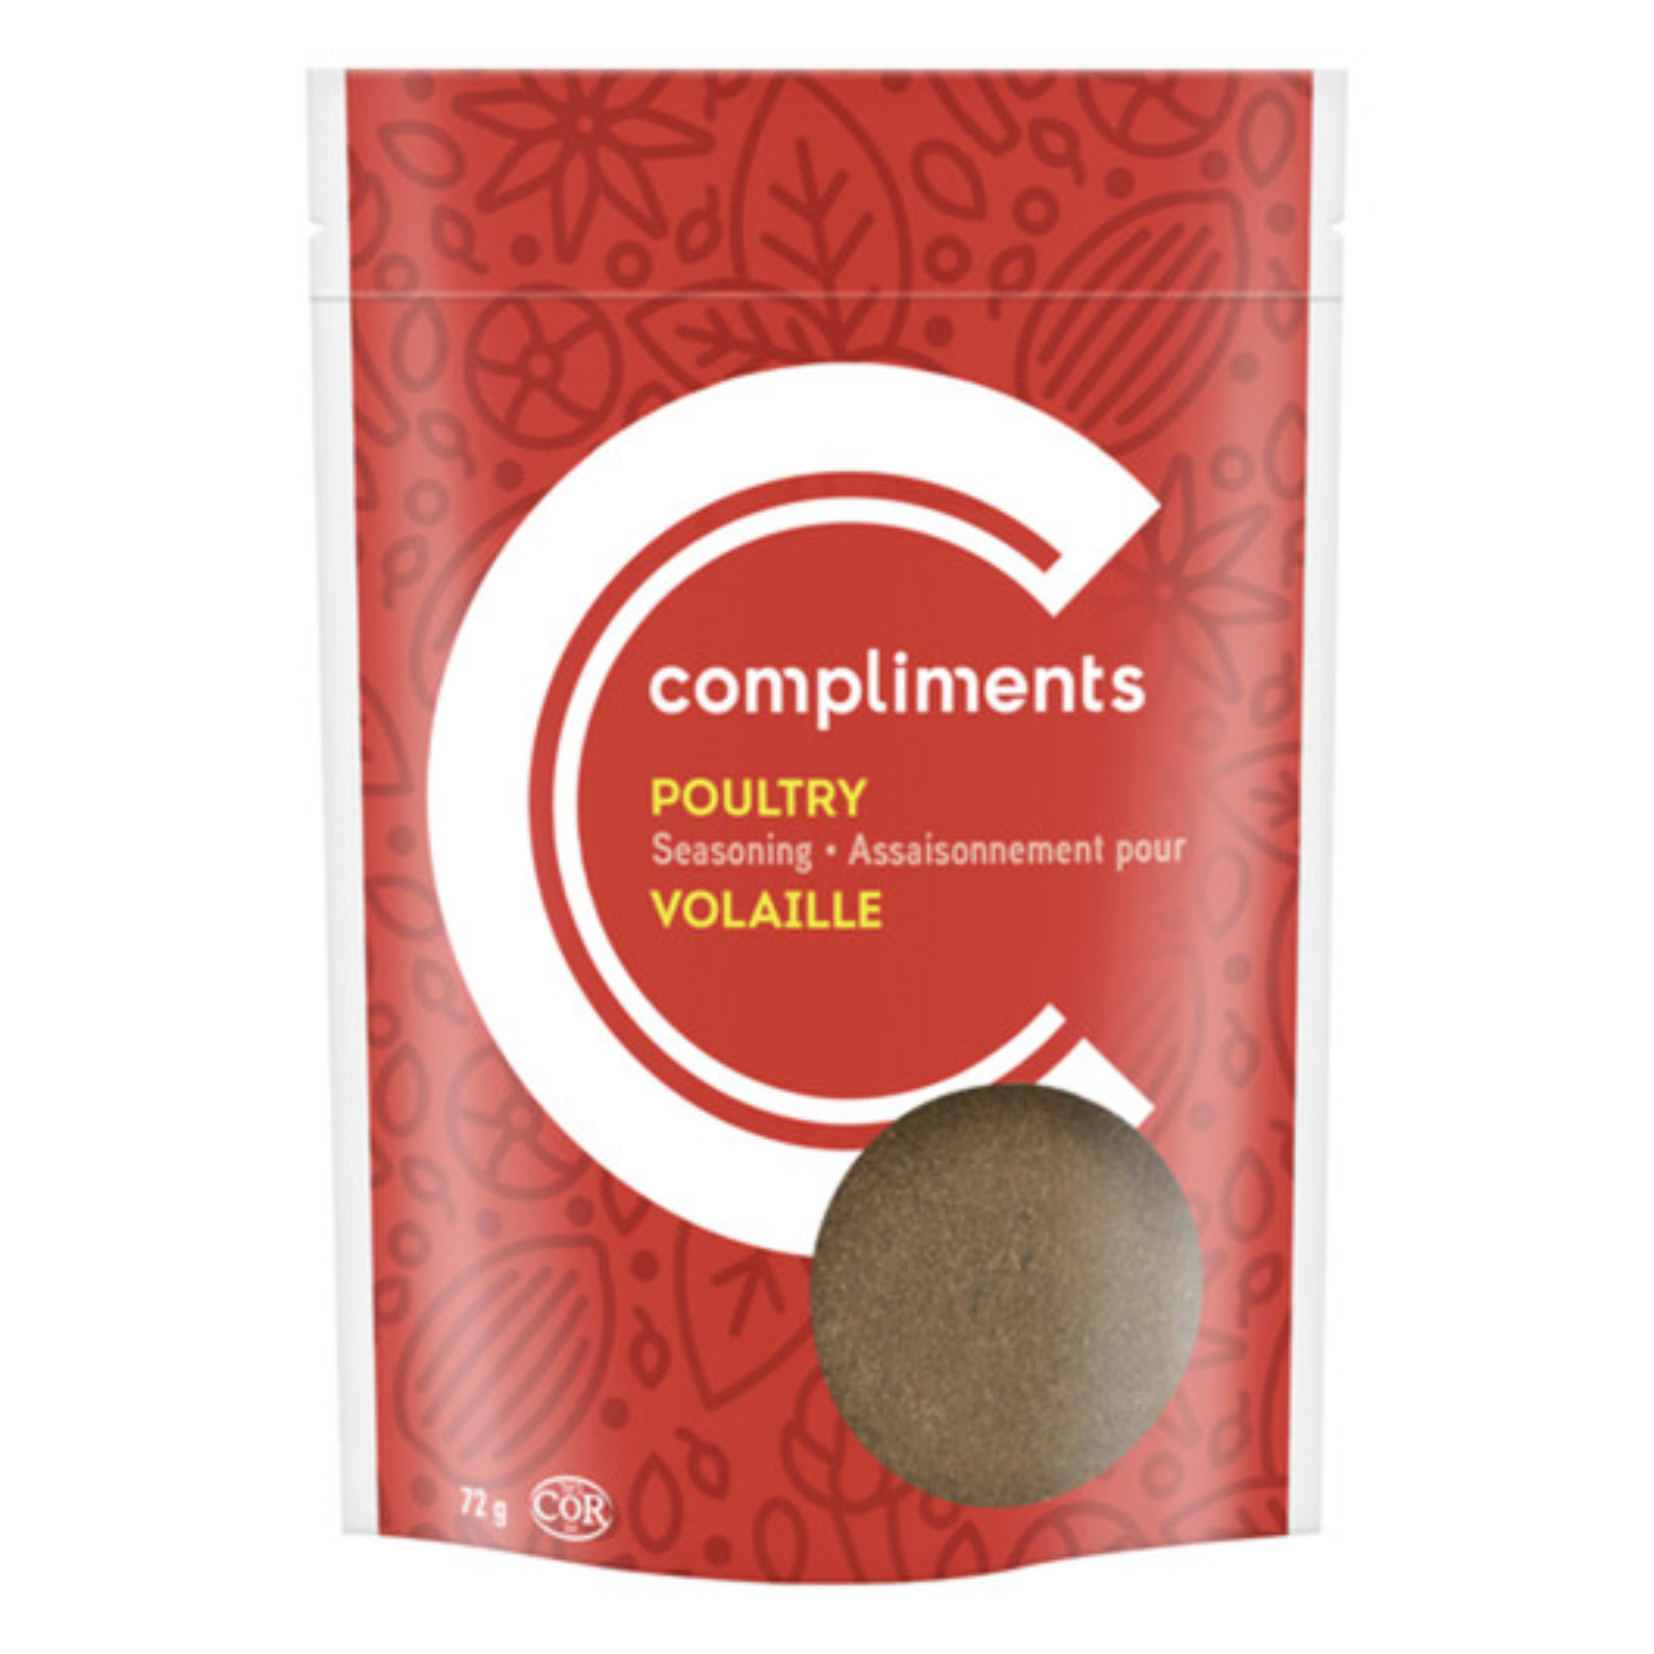 Compliments Poultry Seasoning 72g